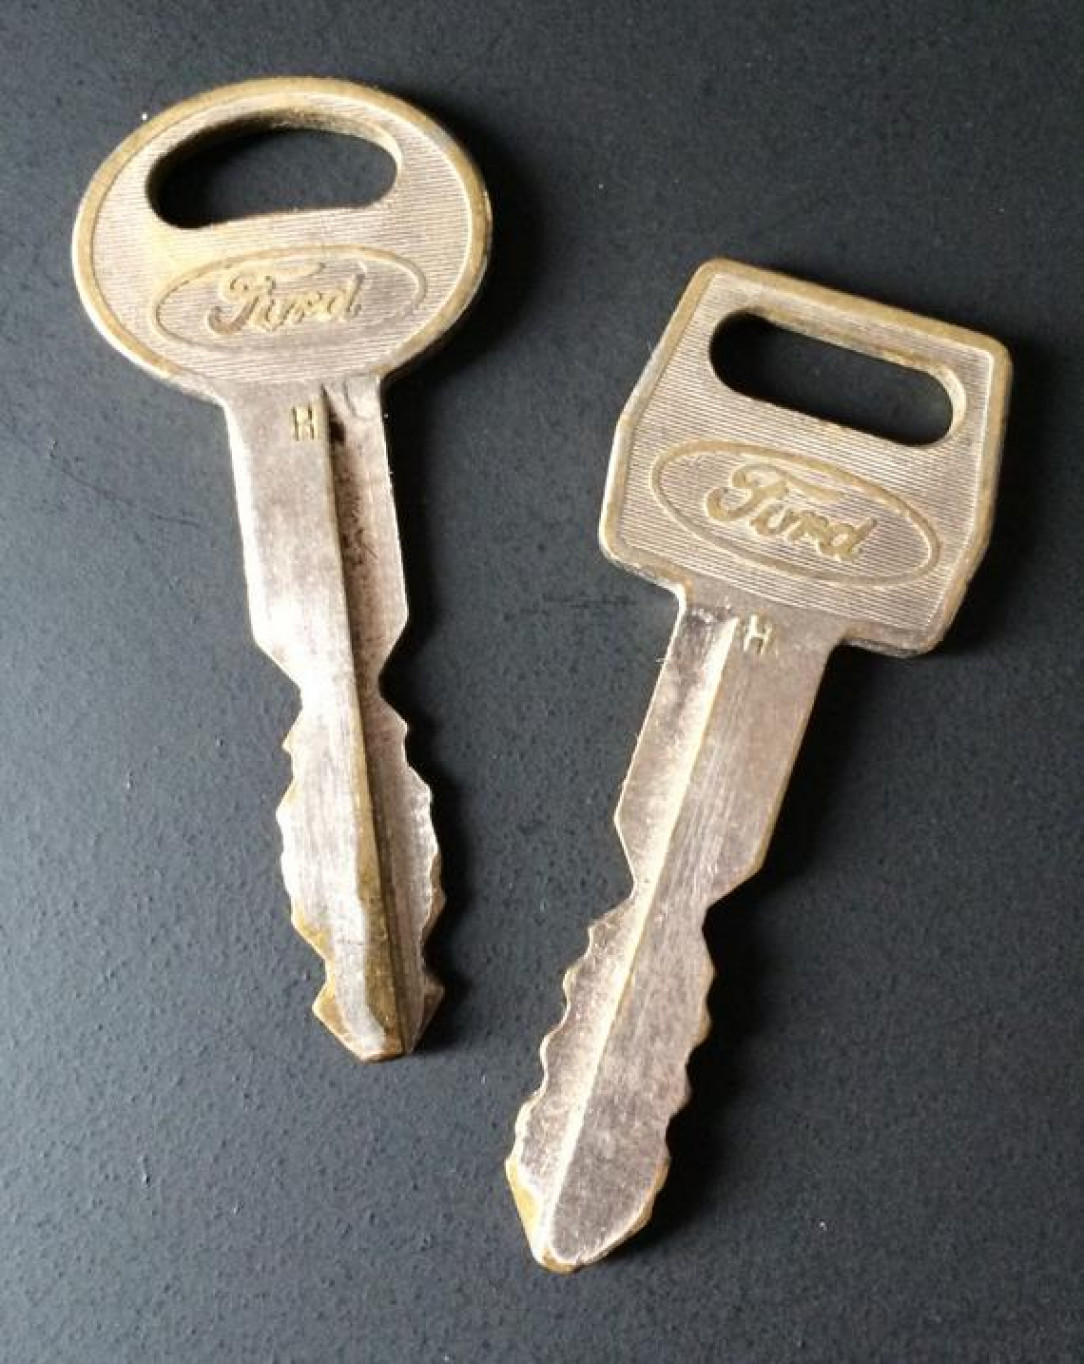 Remember when your car needed two keys, ignition and locks, and you had to use a key to open the trunk?